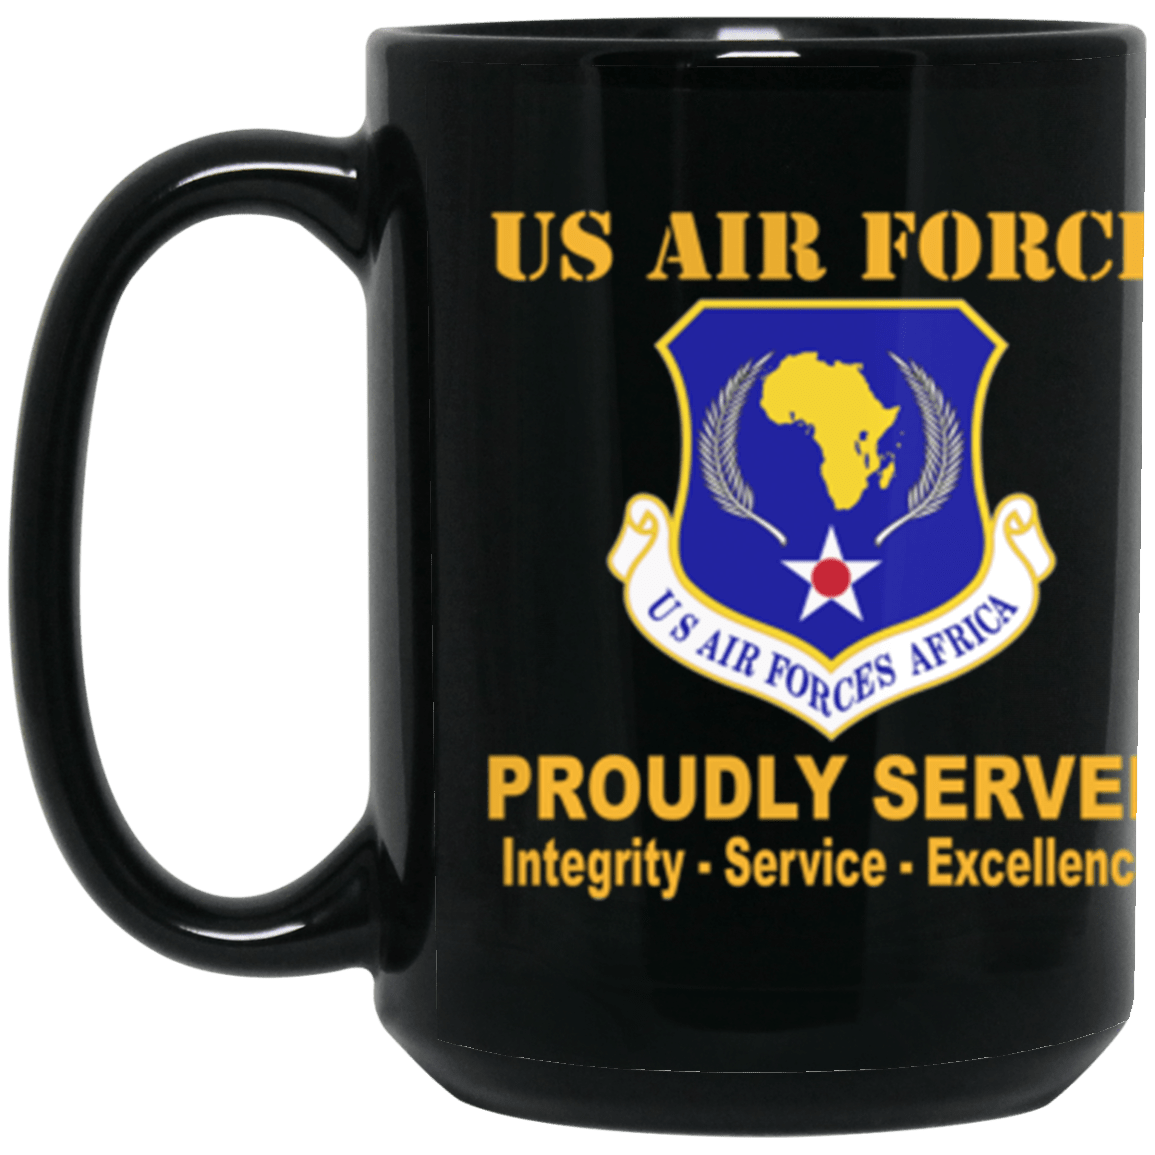 US Air Force Special Operations Command Proudly Served Core Values 15 oz. Black Mug-Mug-USAF-Veterans Nation